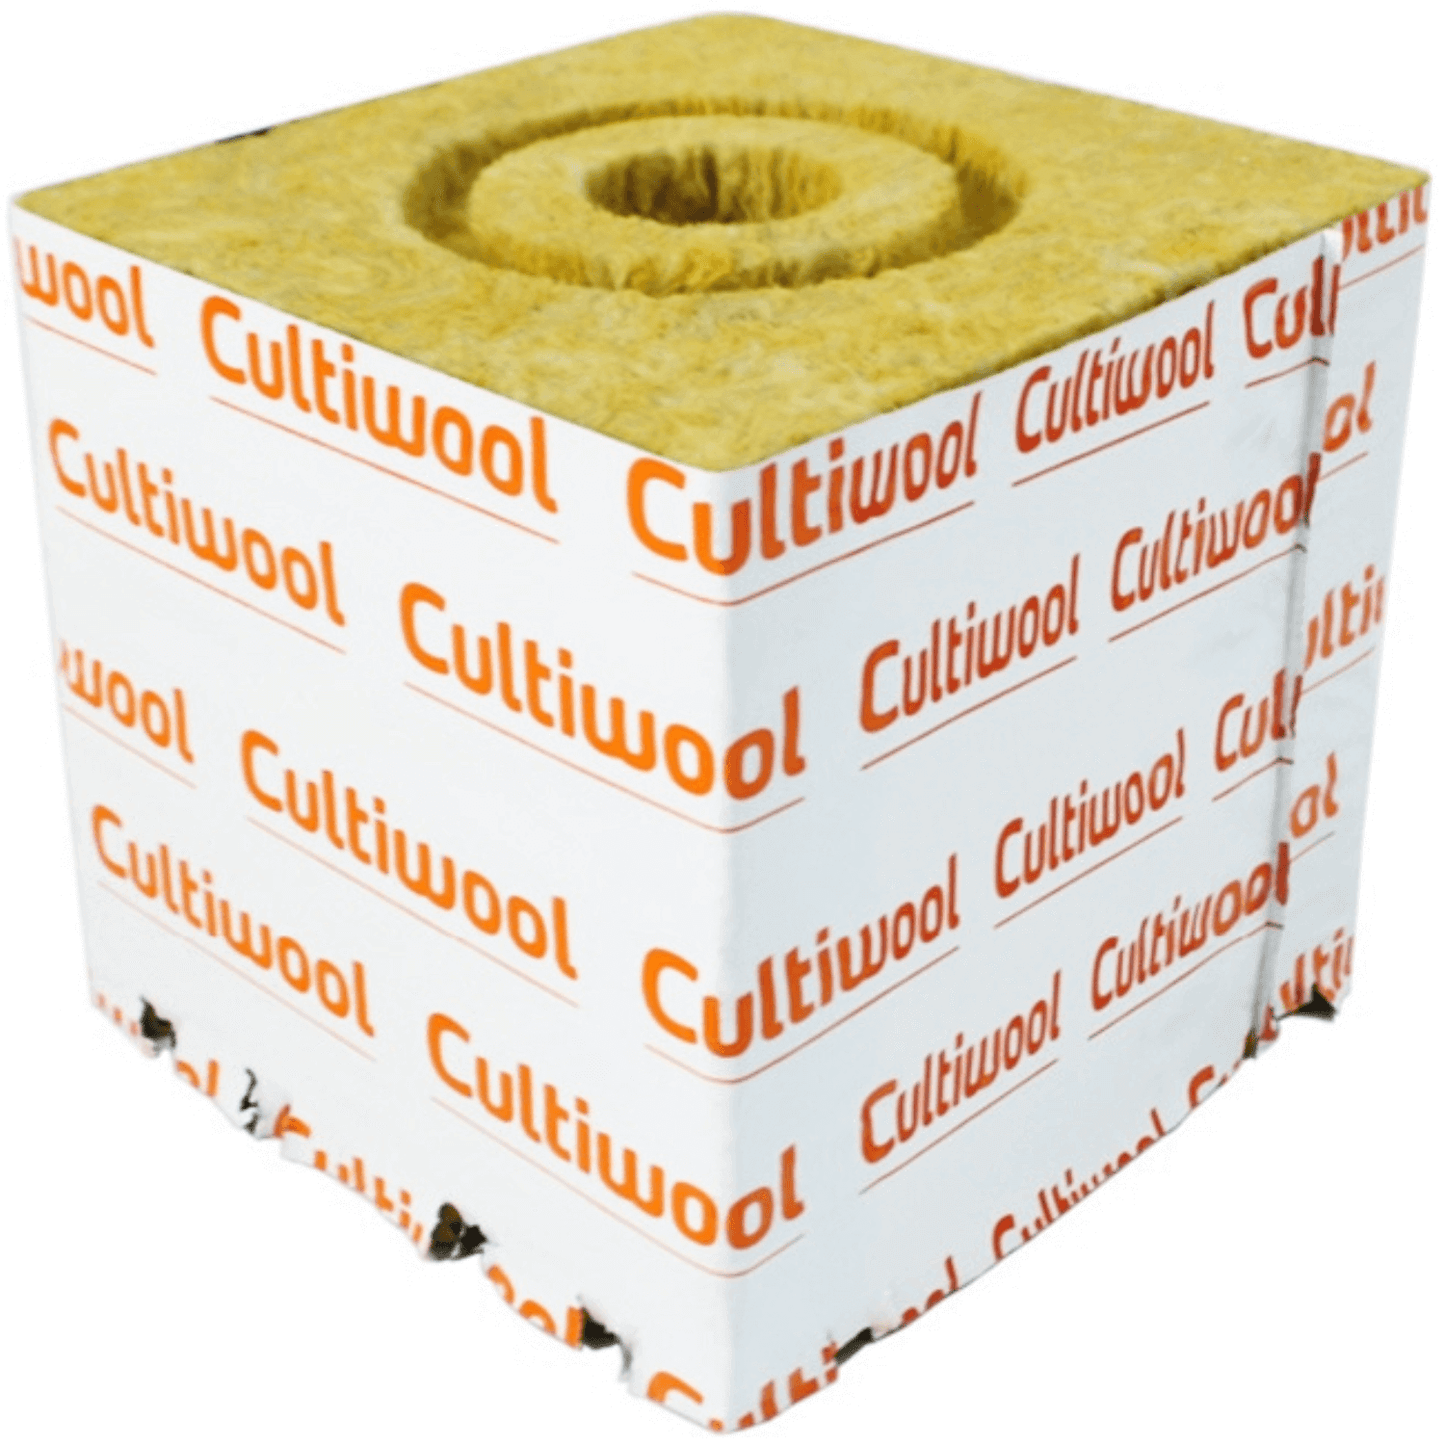 Cultiwool 6" x 6" x 6" Blocks of Cultilene Rockwool with Optidrain and Donut Rings - Case of 48 CUL667 Planting & Watering